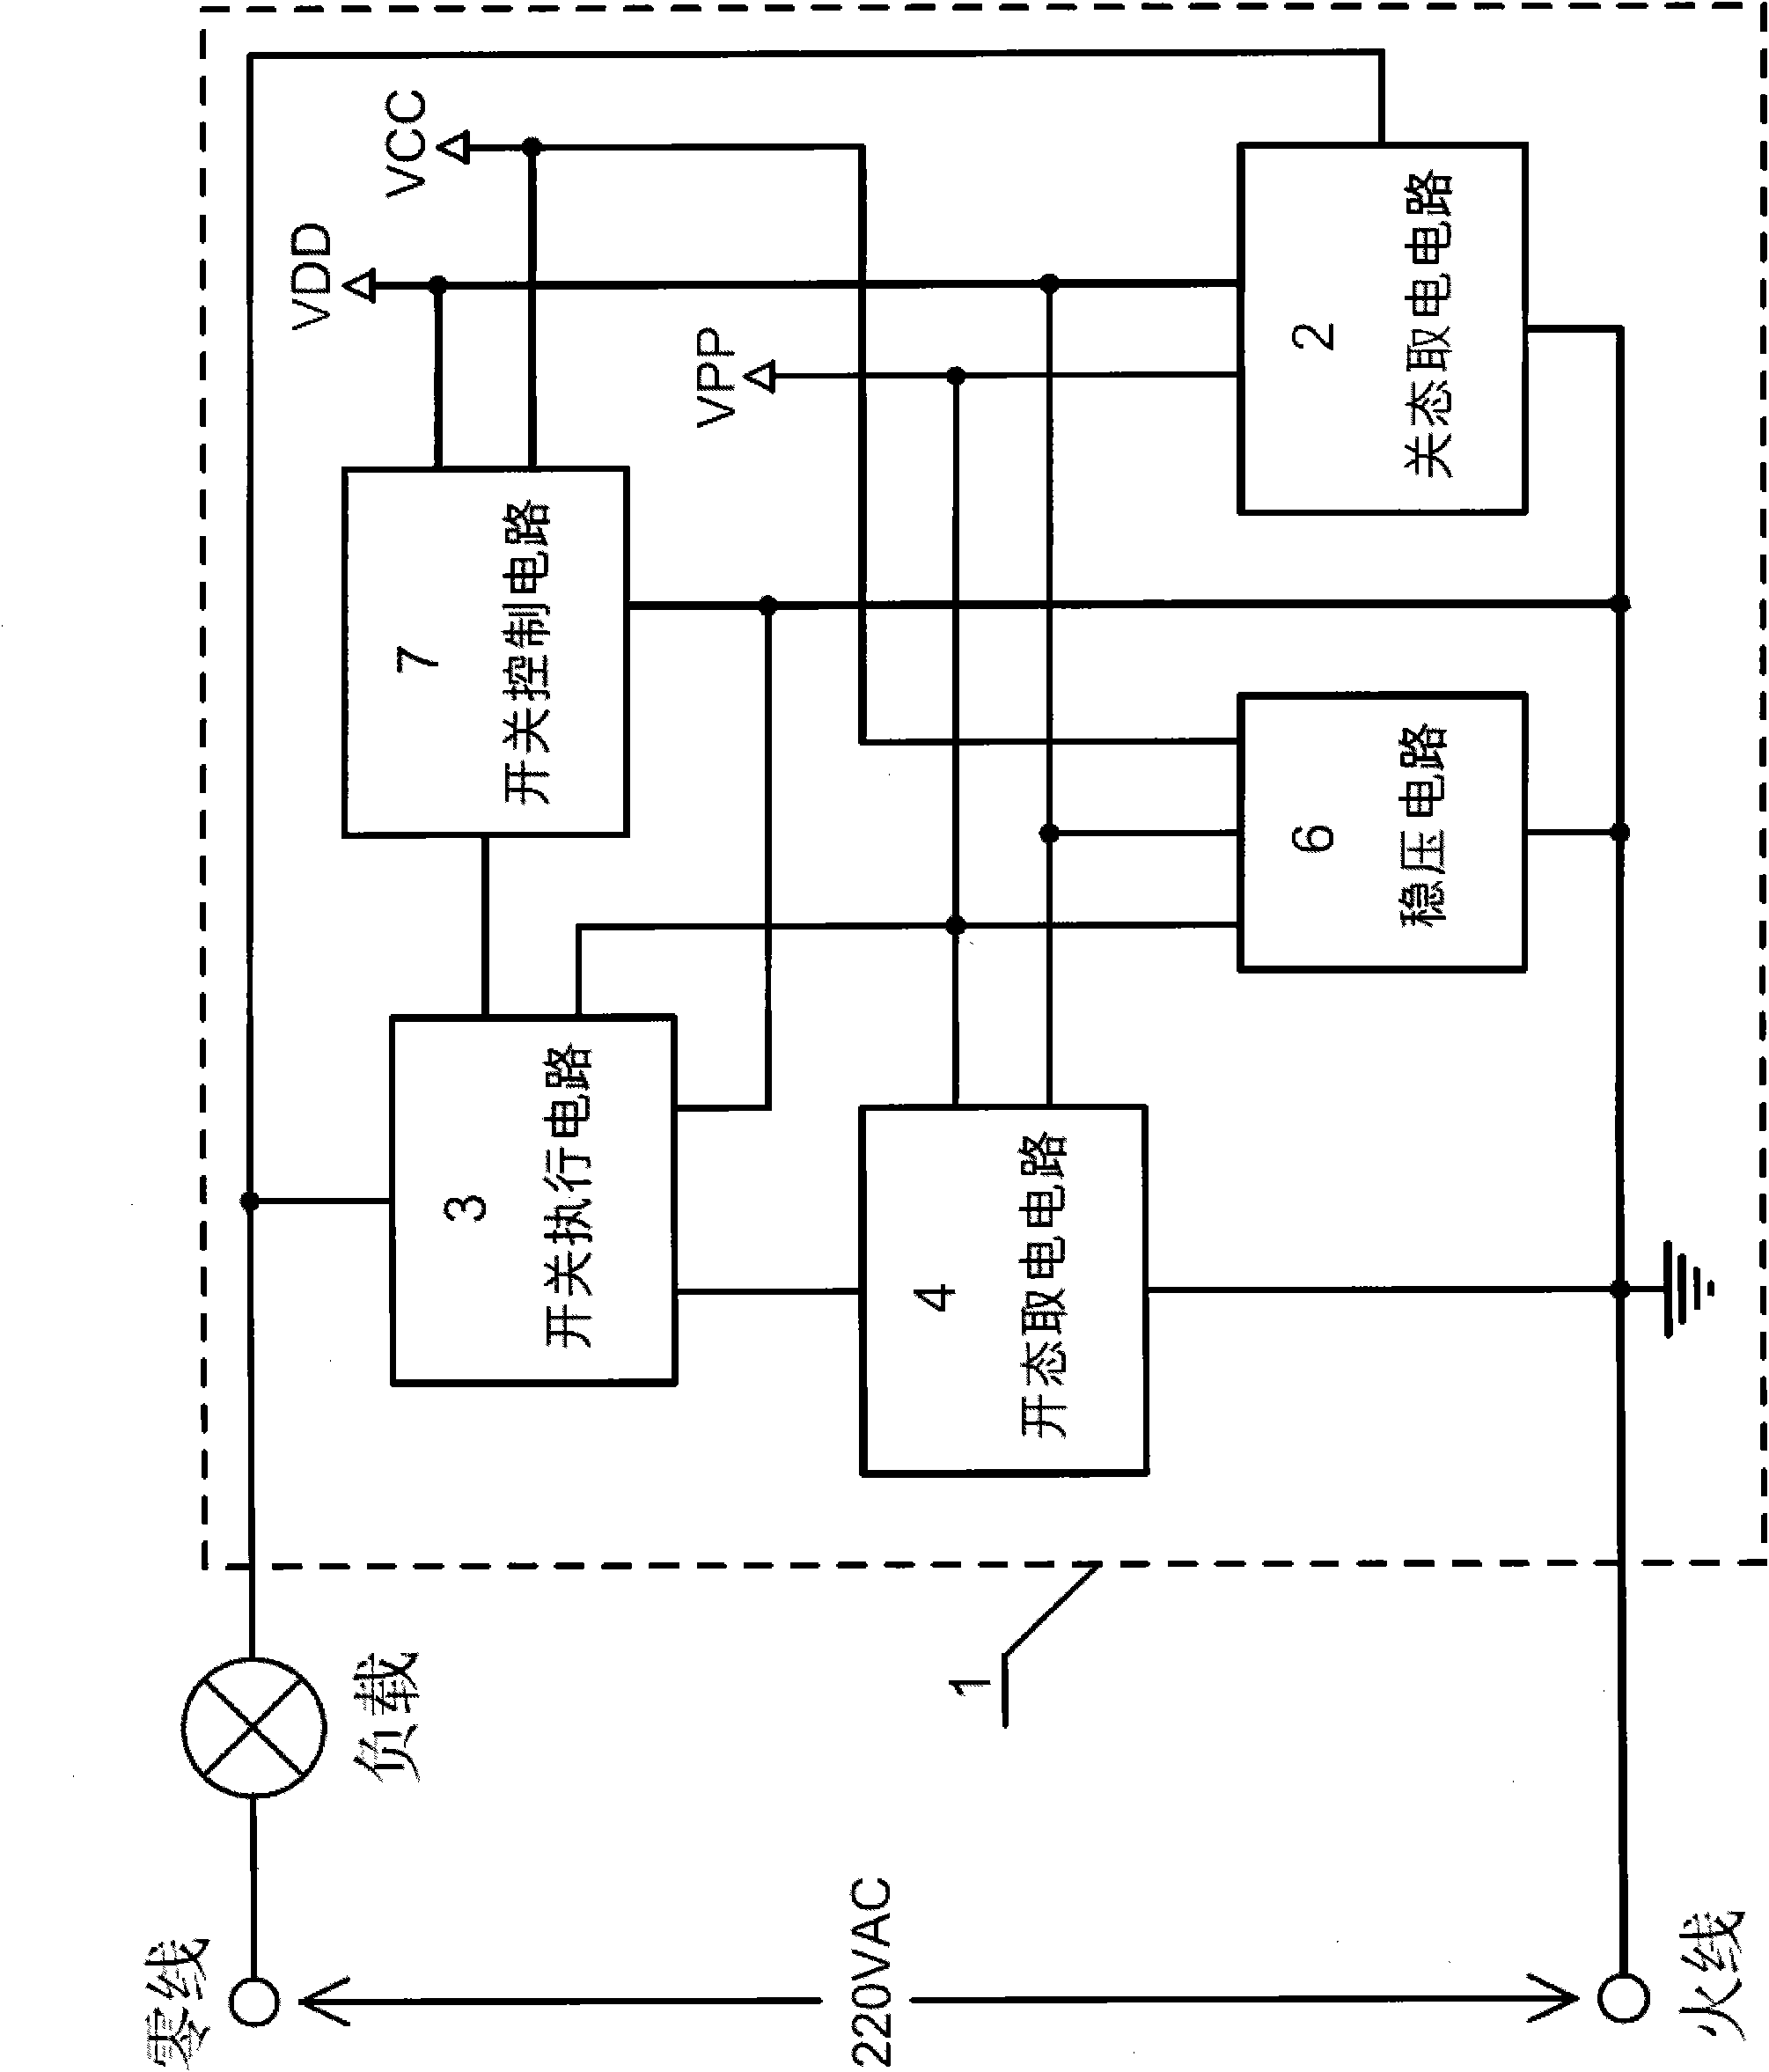 Solution to working power supply and power of two-wire-system electronic switch